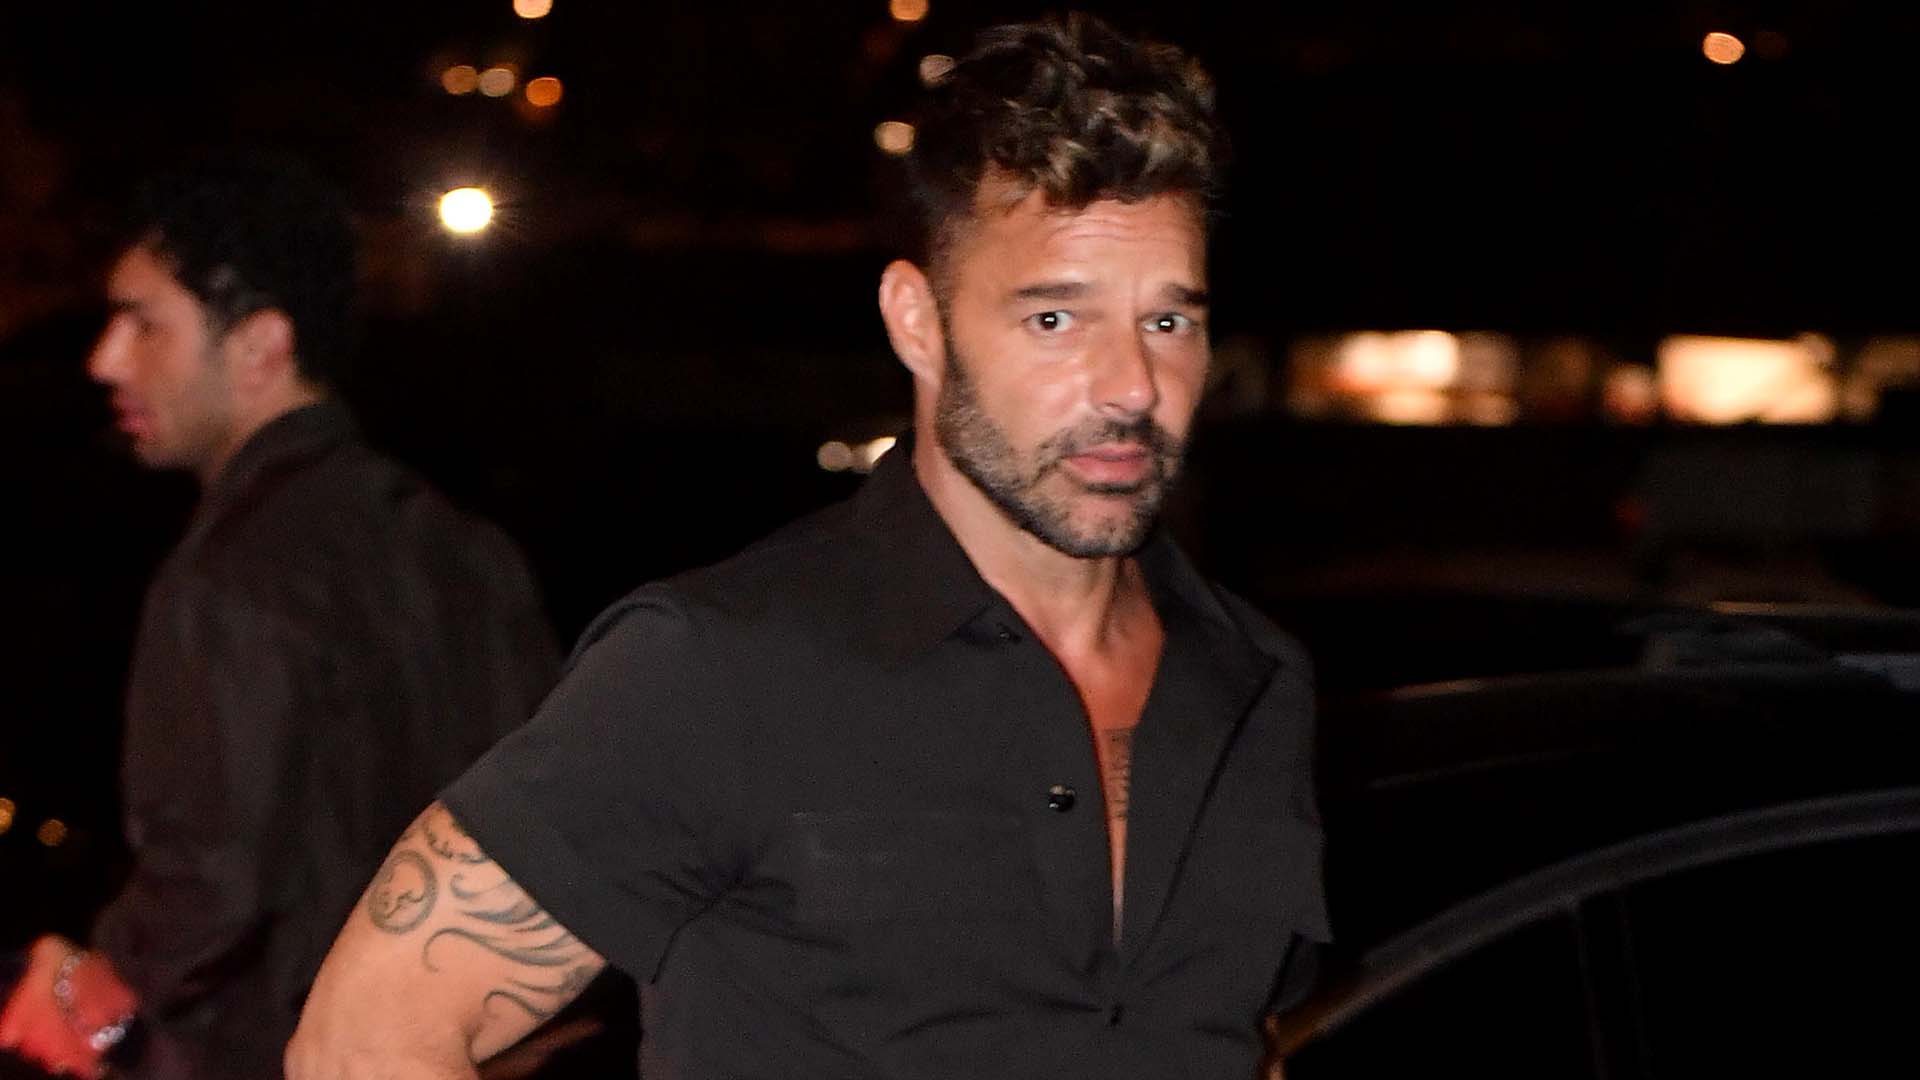 Singer Ricky Martin in Cannes